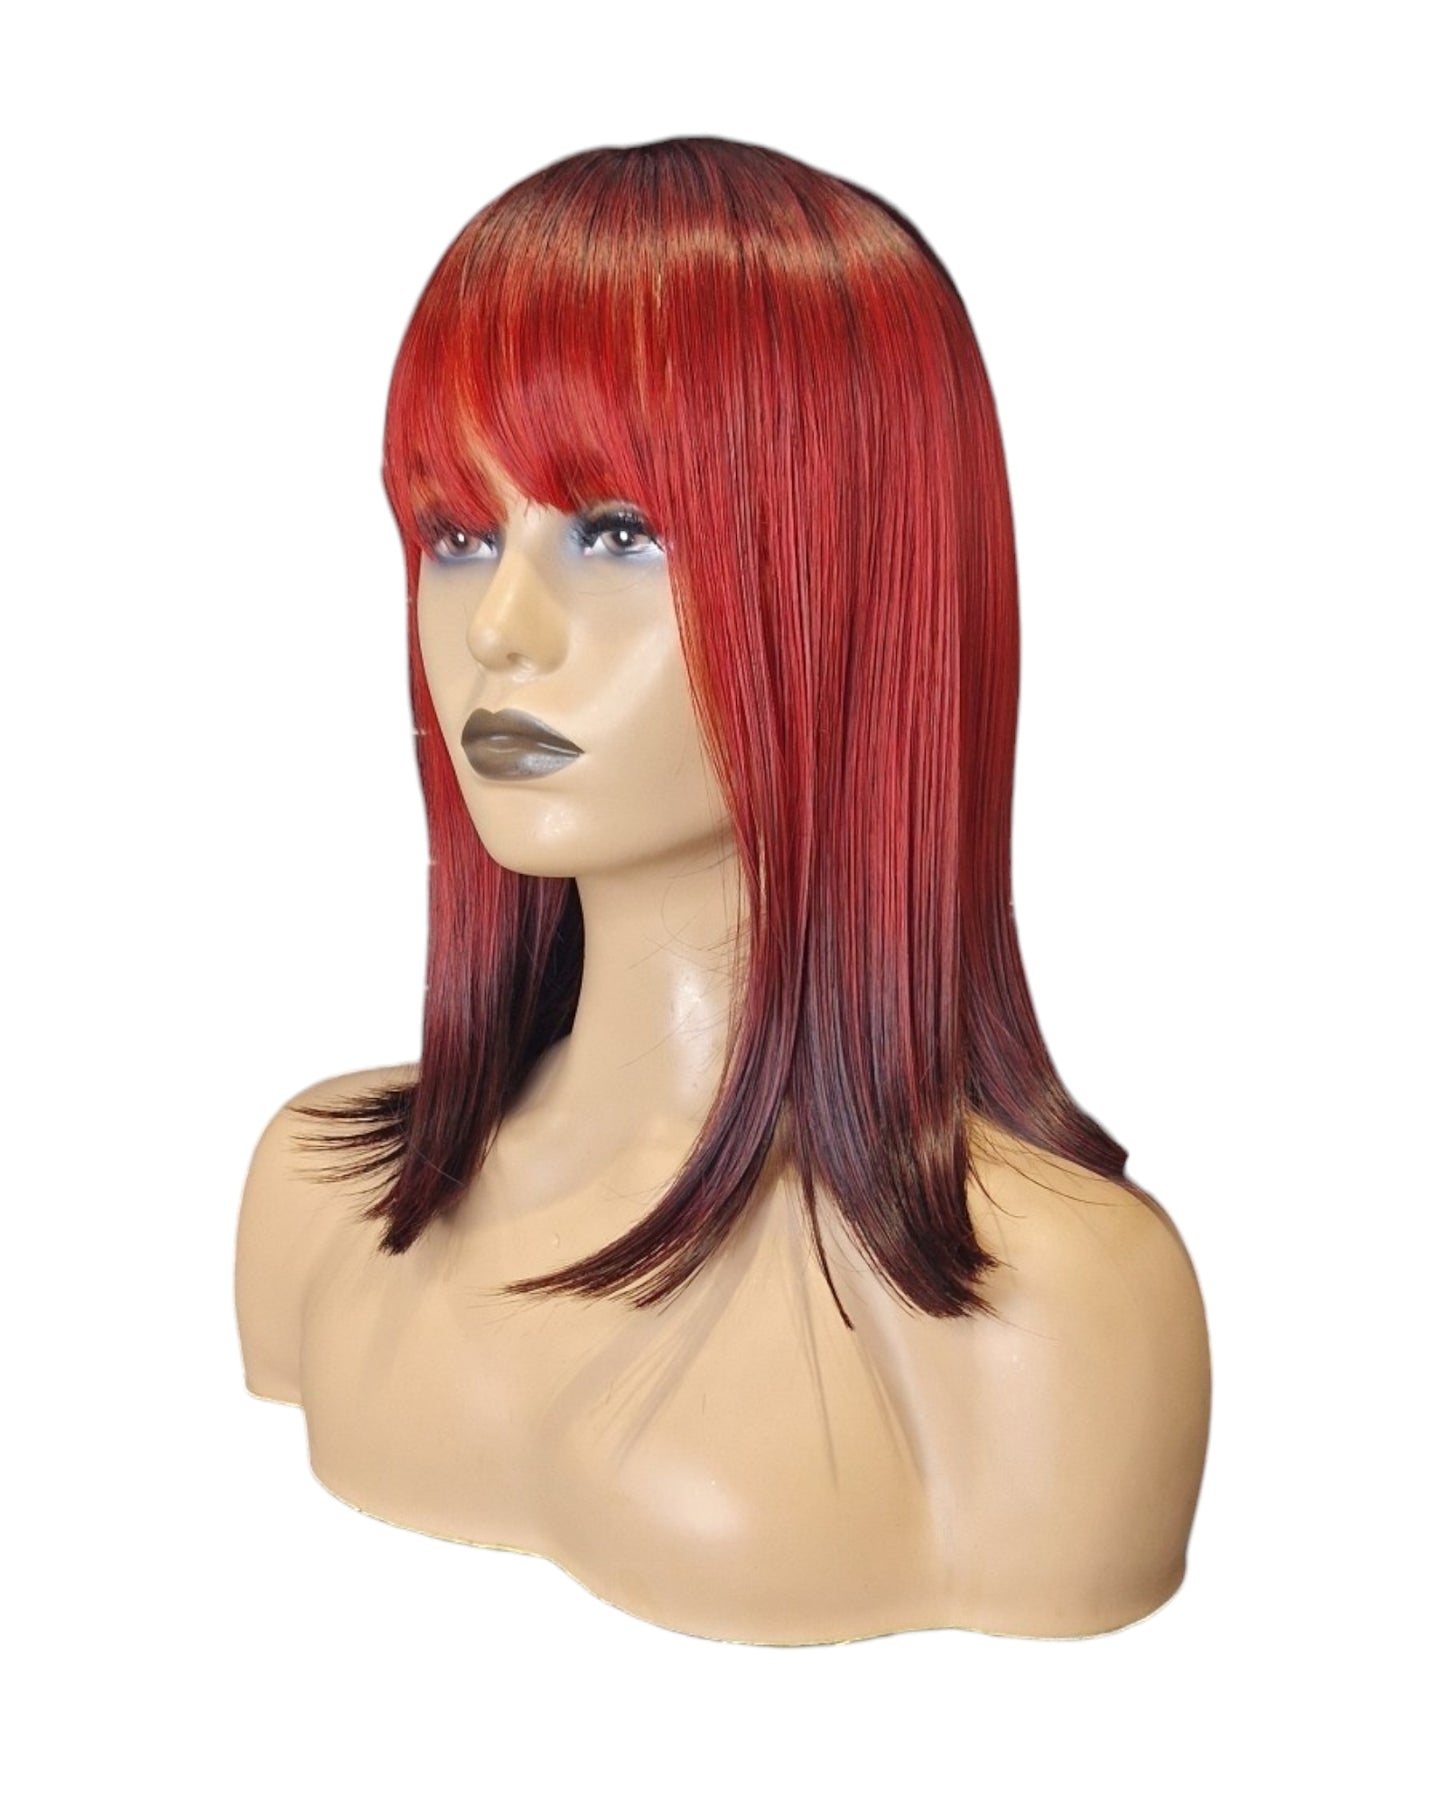 Red Ombre Bobbed Hairstyle Wig. Katy.